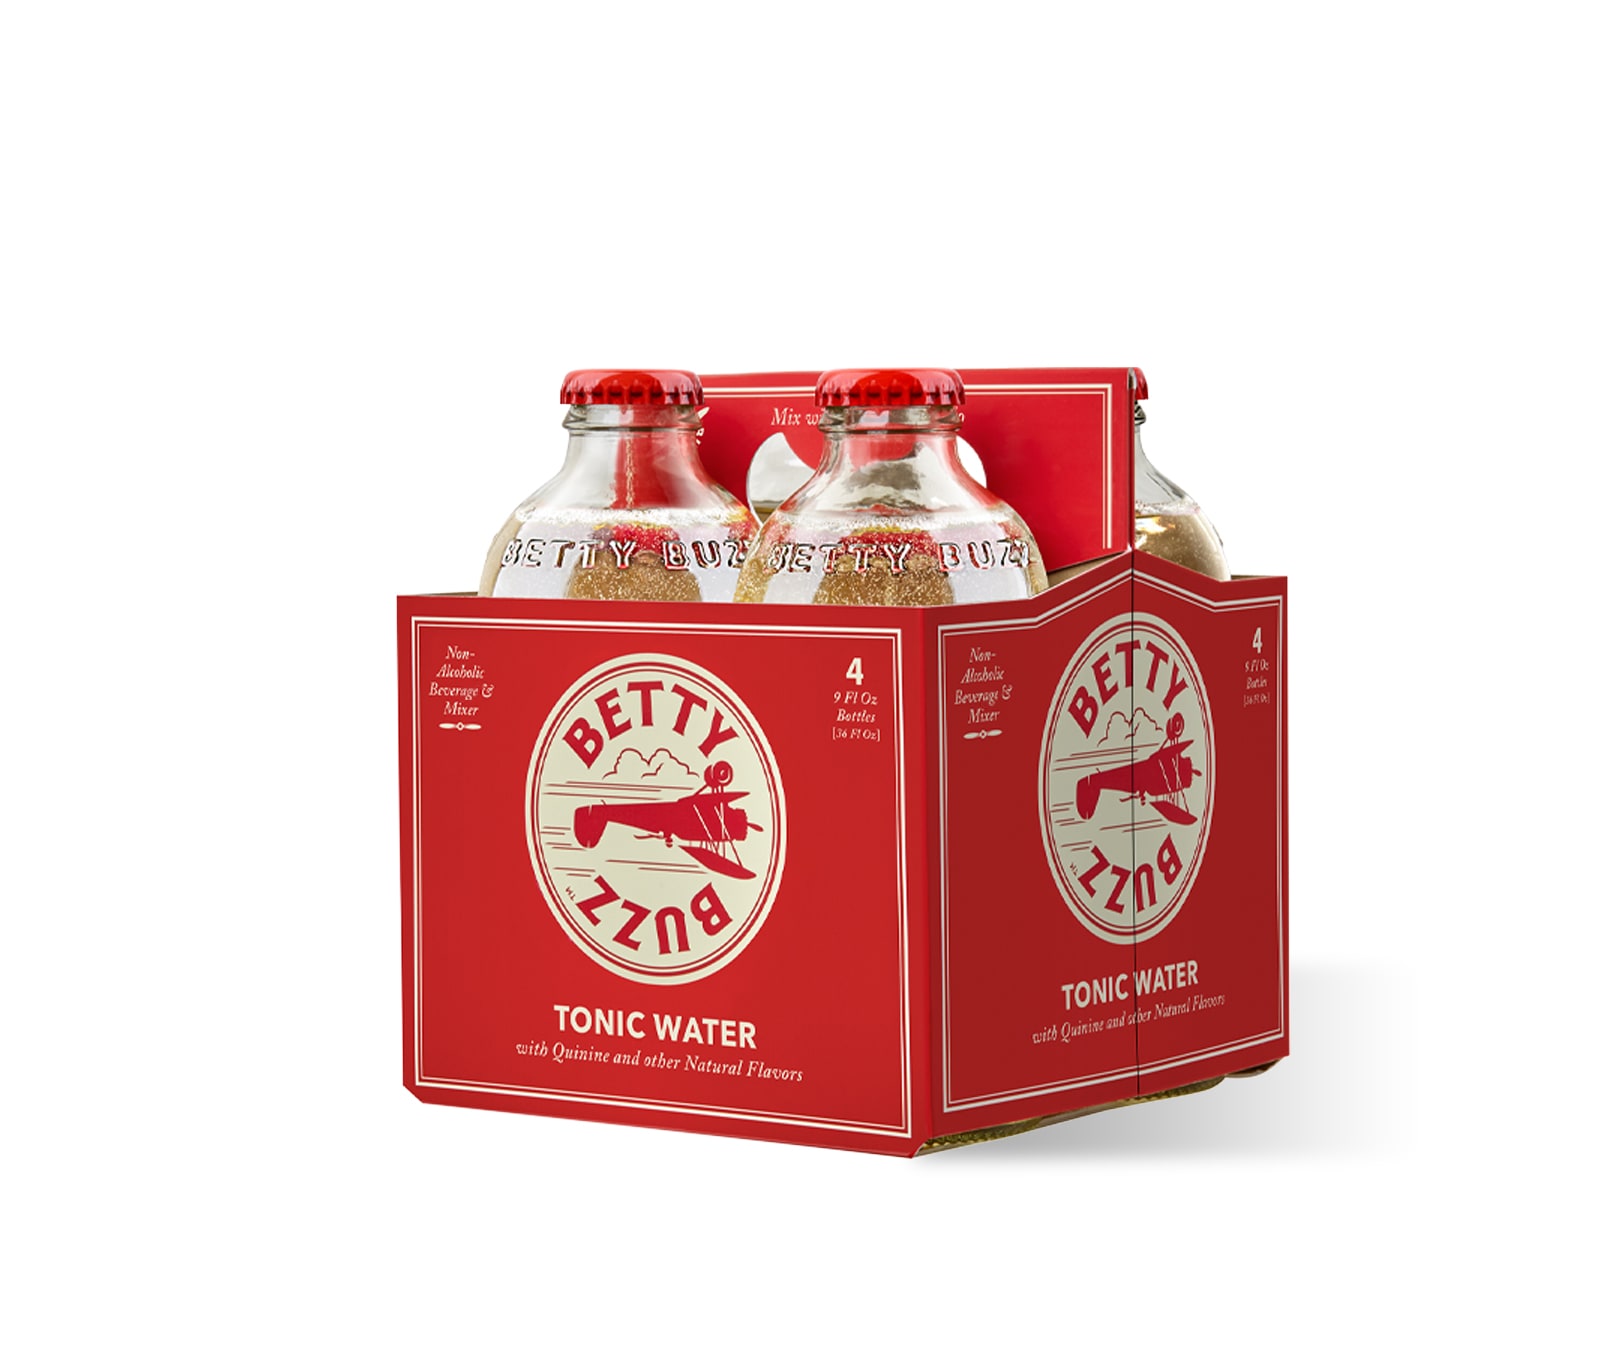 Betty Buzz Tonic 4-pack beverage packaging design